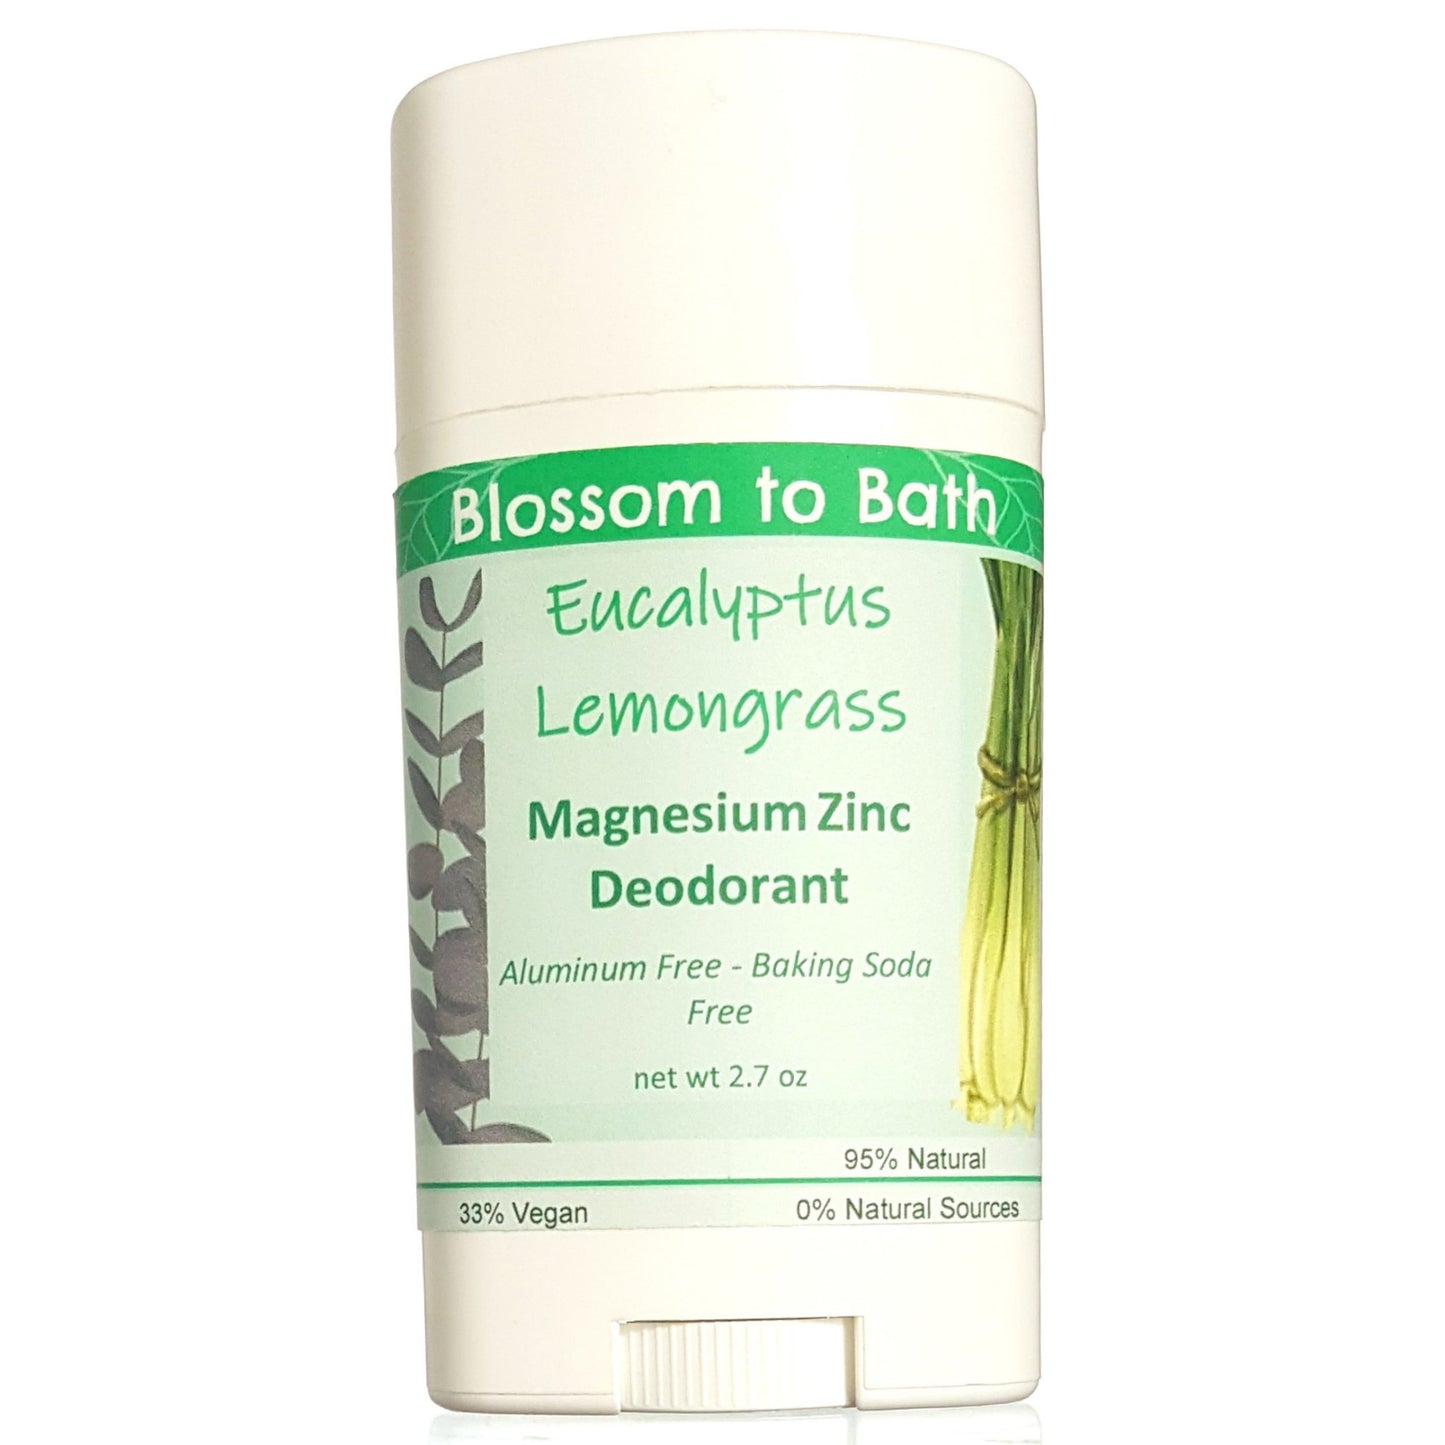 Buy Blossom to Bath Eucalyptus Lemongrass Magnesium Zinc Deodorant from Flowersong Soap Studio.  Long lasting protection made from organic botanicals and butters, made without baking soda, tested in the Arizona heat  Fresh, sweet herbally clean scent of lemongrass and bracing Eucalyptus.